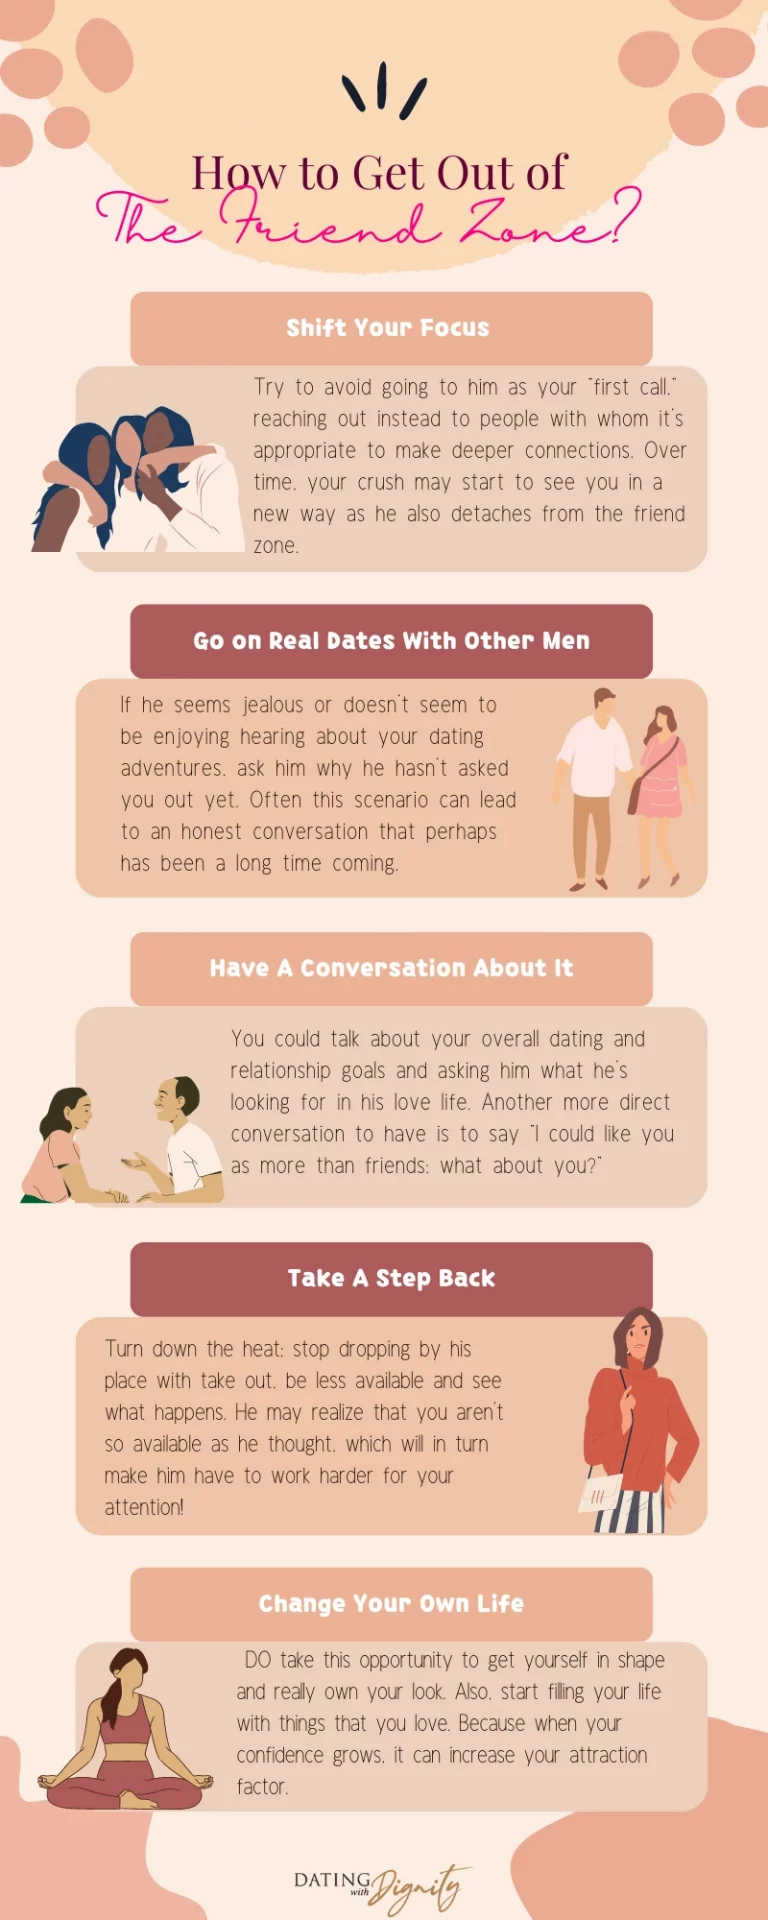 How To Get Out Of The Friend Zone Infographic